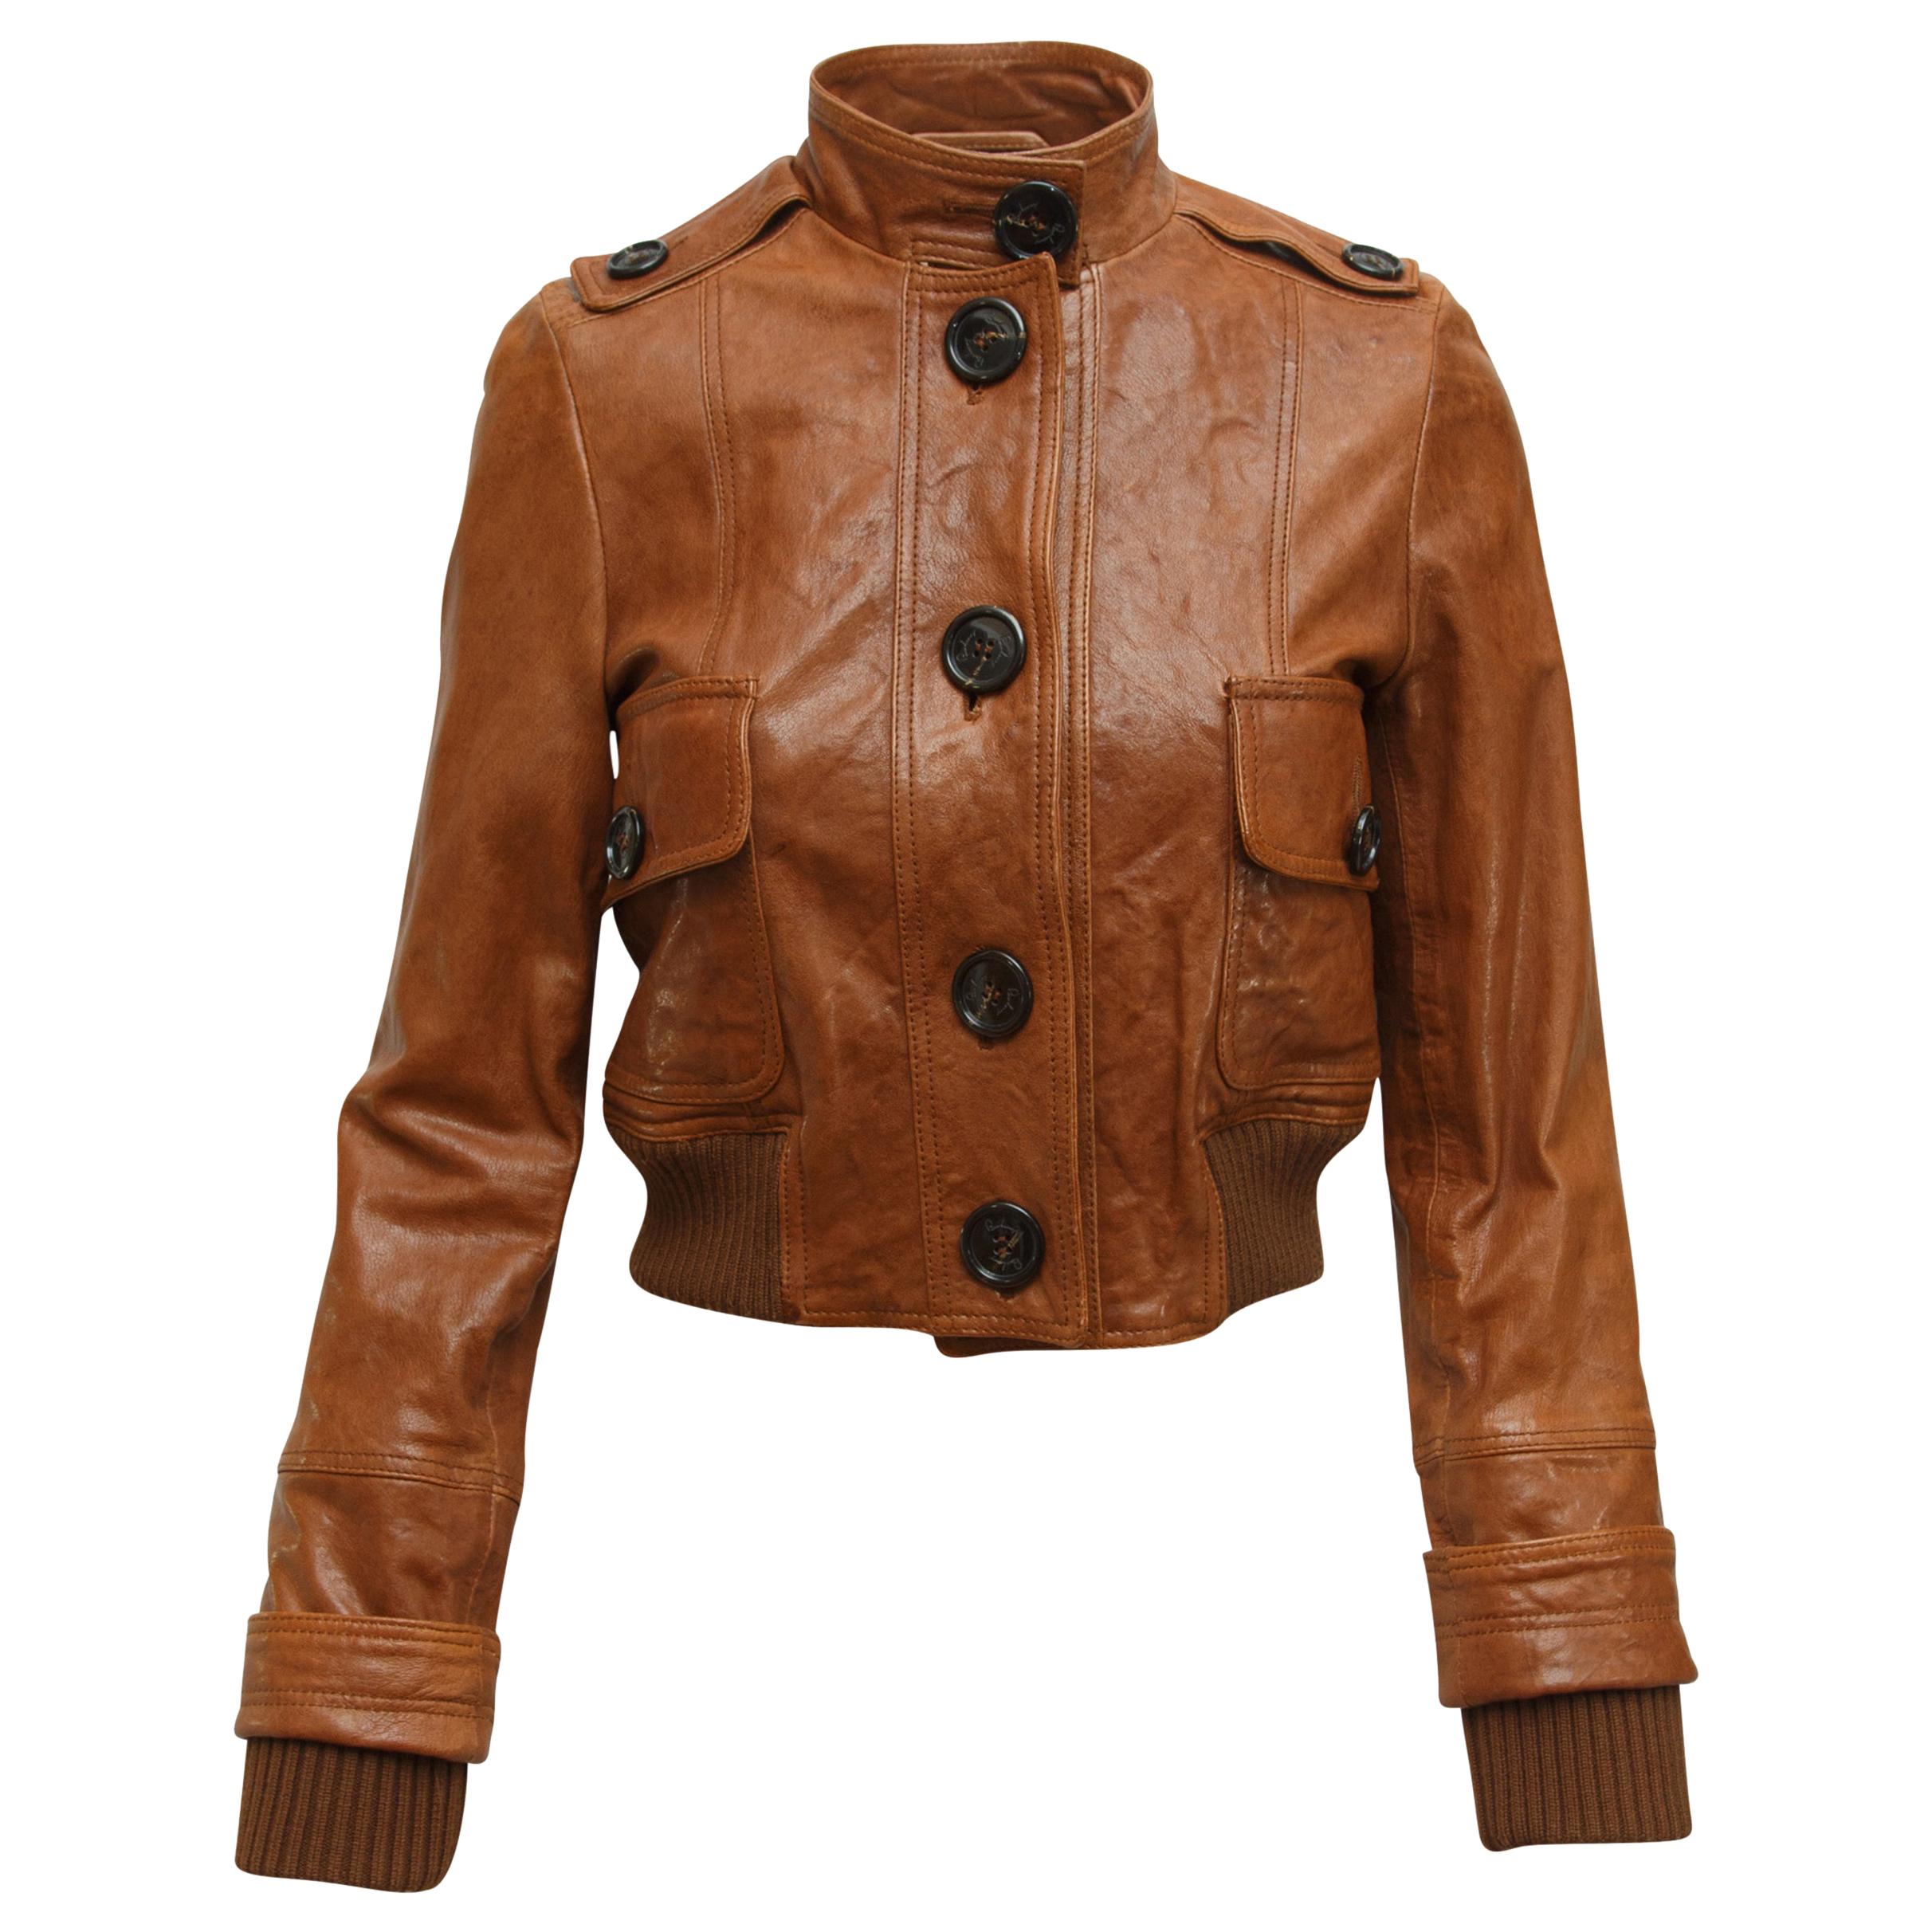 Burberry London Brown Leather Jacket